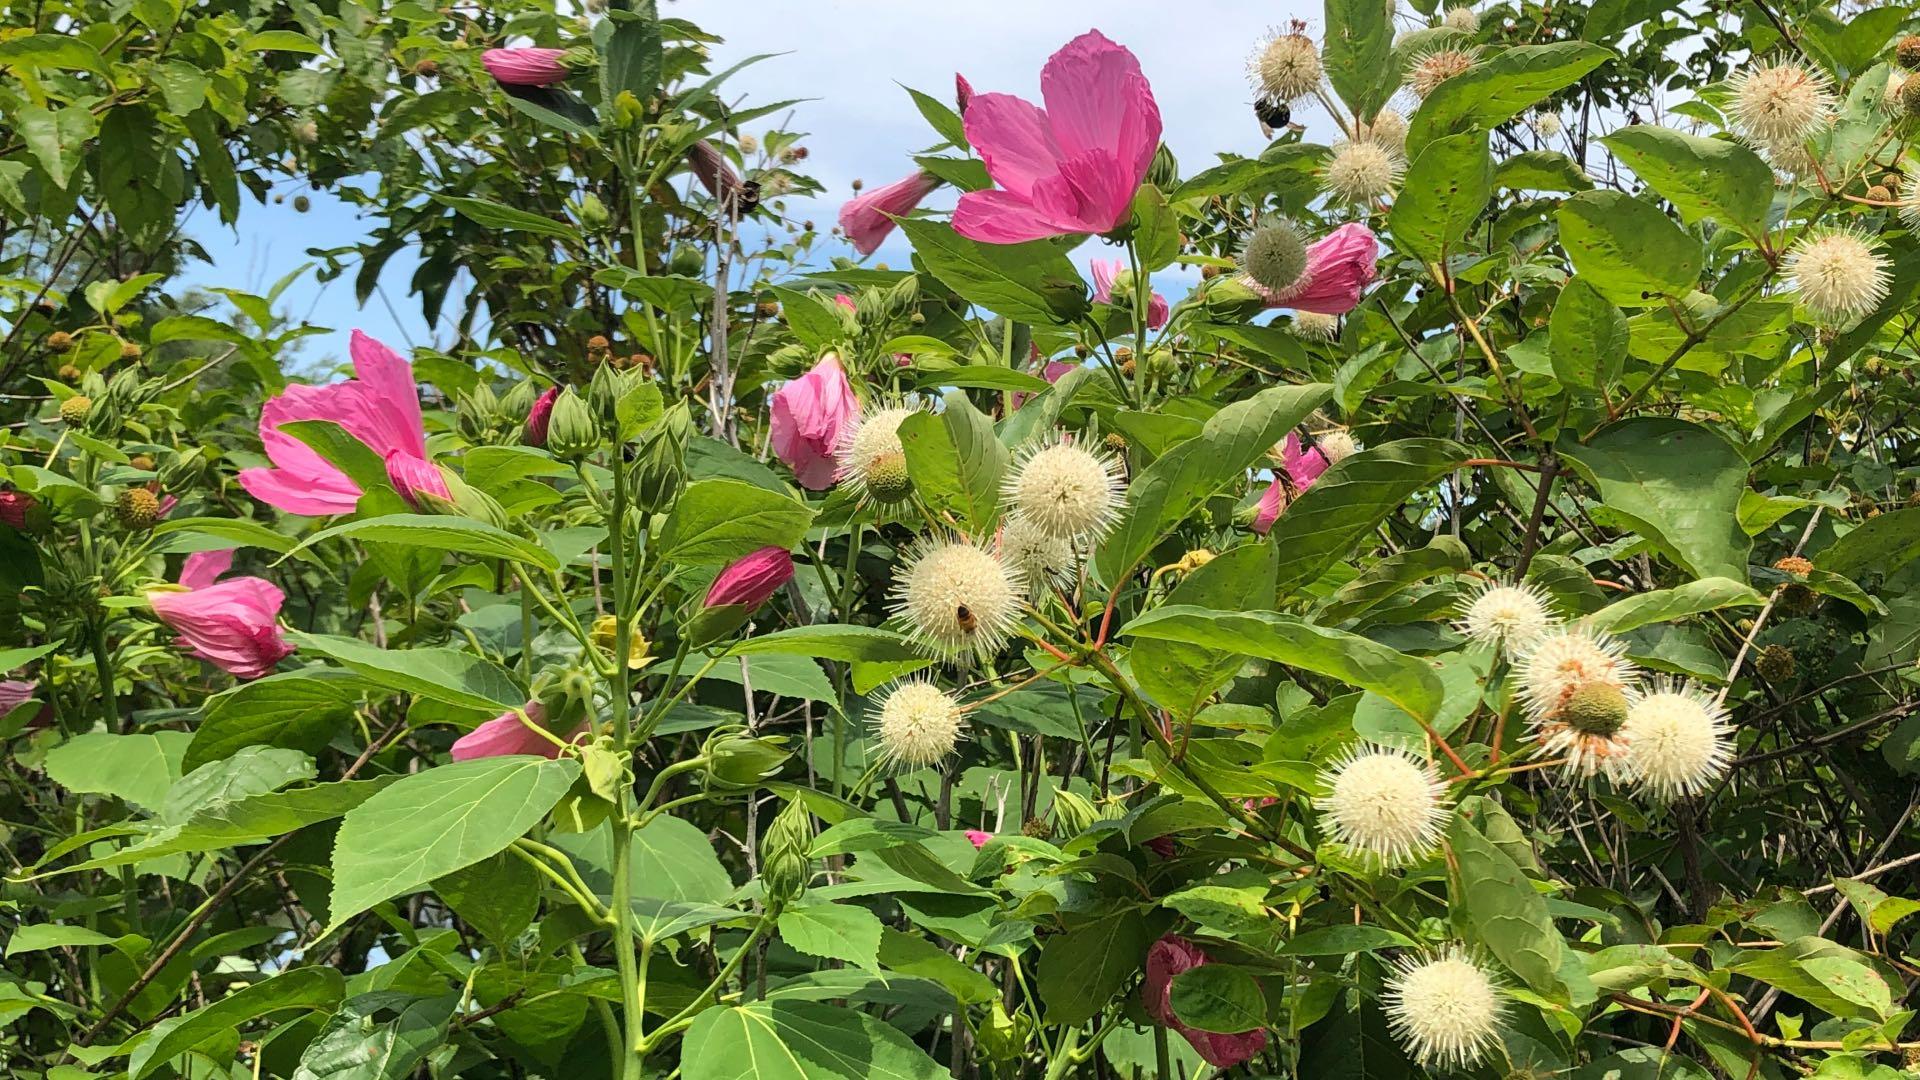 Look for buttonbush, too, a native shrub beloved by birds and pollinators. Like swamp rose mallow, buttonbush loves moist soil and can even withstand flooding. (Patty Wetli / WTTW News) 